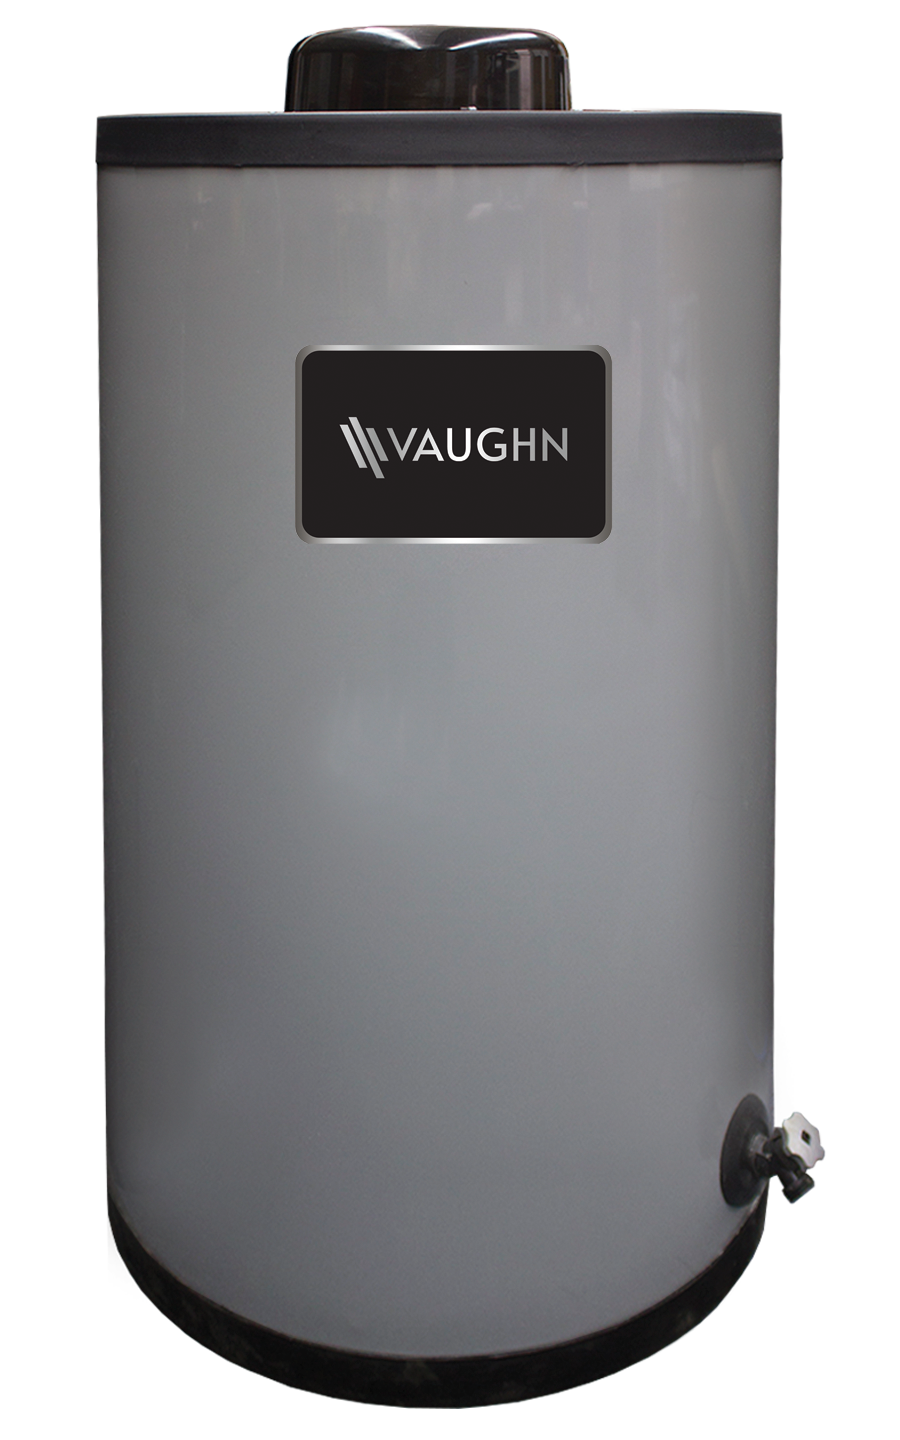 Residential & Commercial Water Heater Manufacturer